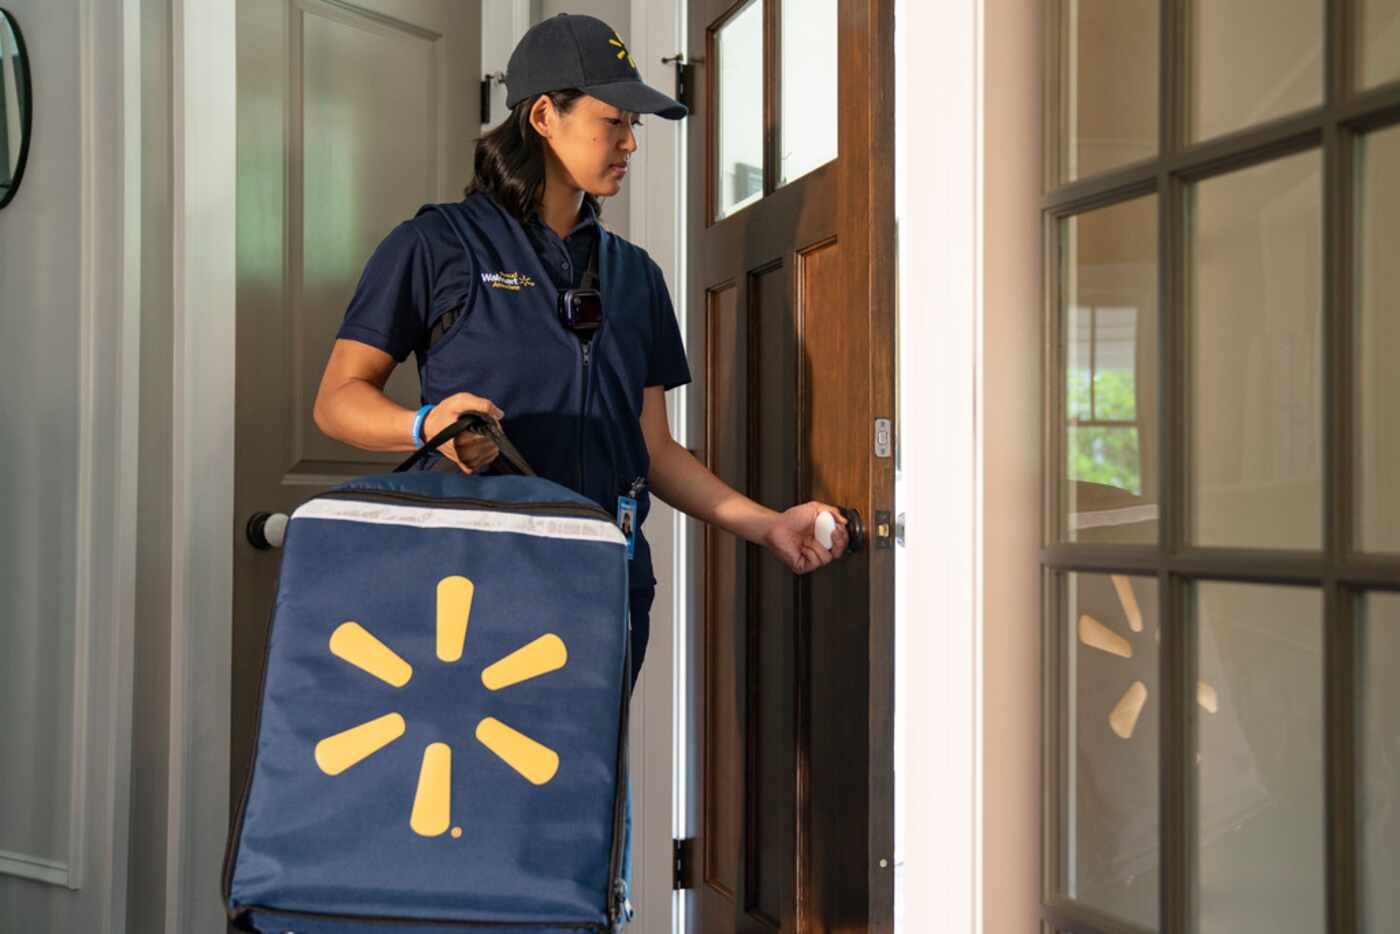 Walmart InHome grocery delivery service will begin in fall 2019.